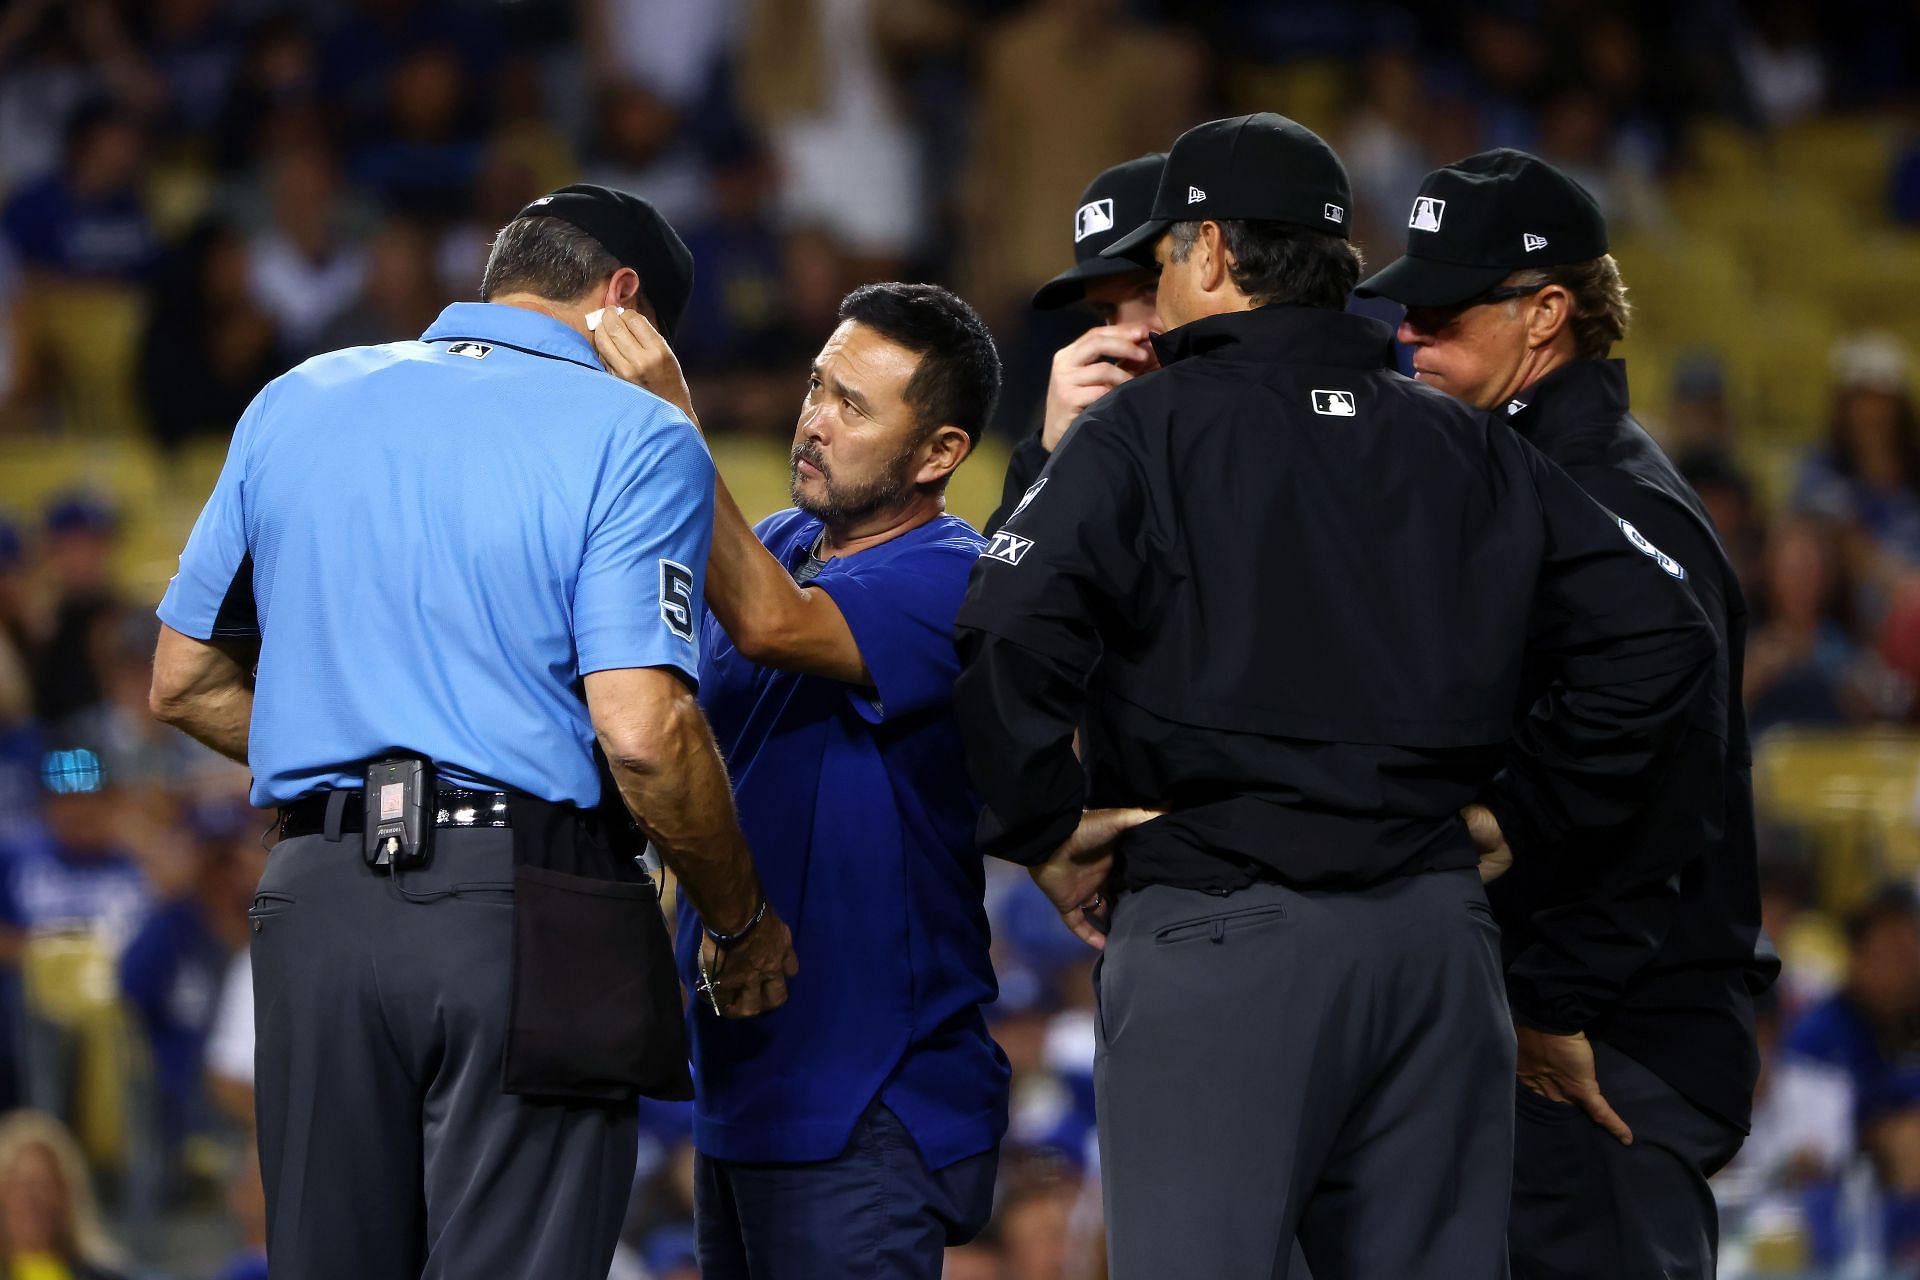 Hernandez being attented to during a game between the Arizona Diamondbacks and the Los Angeles Dodgers